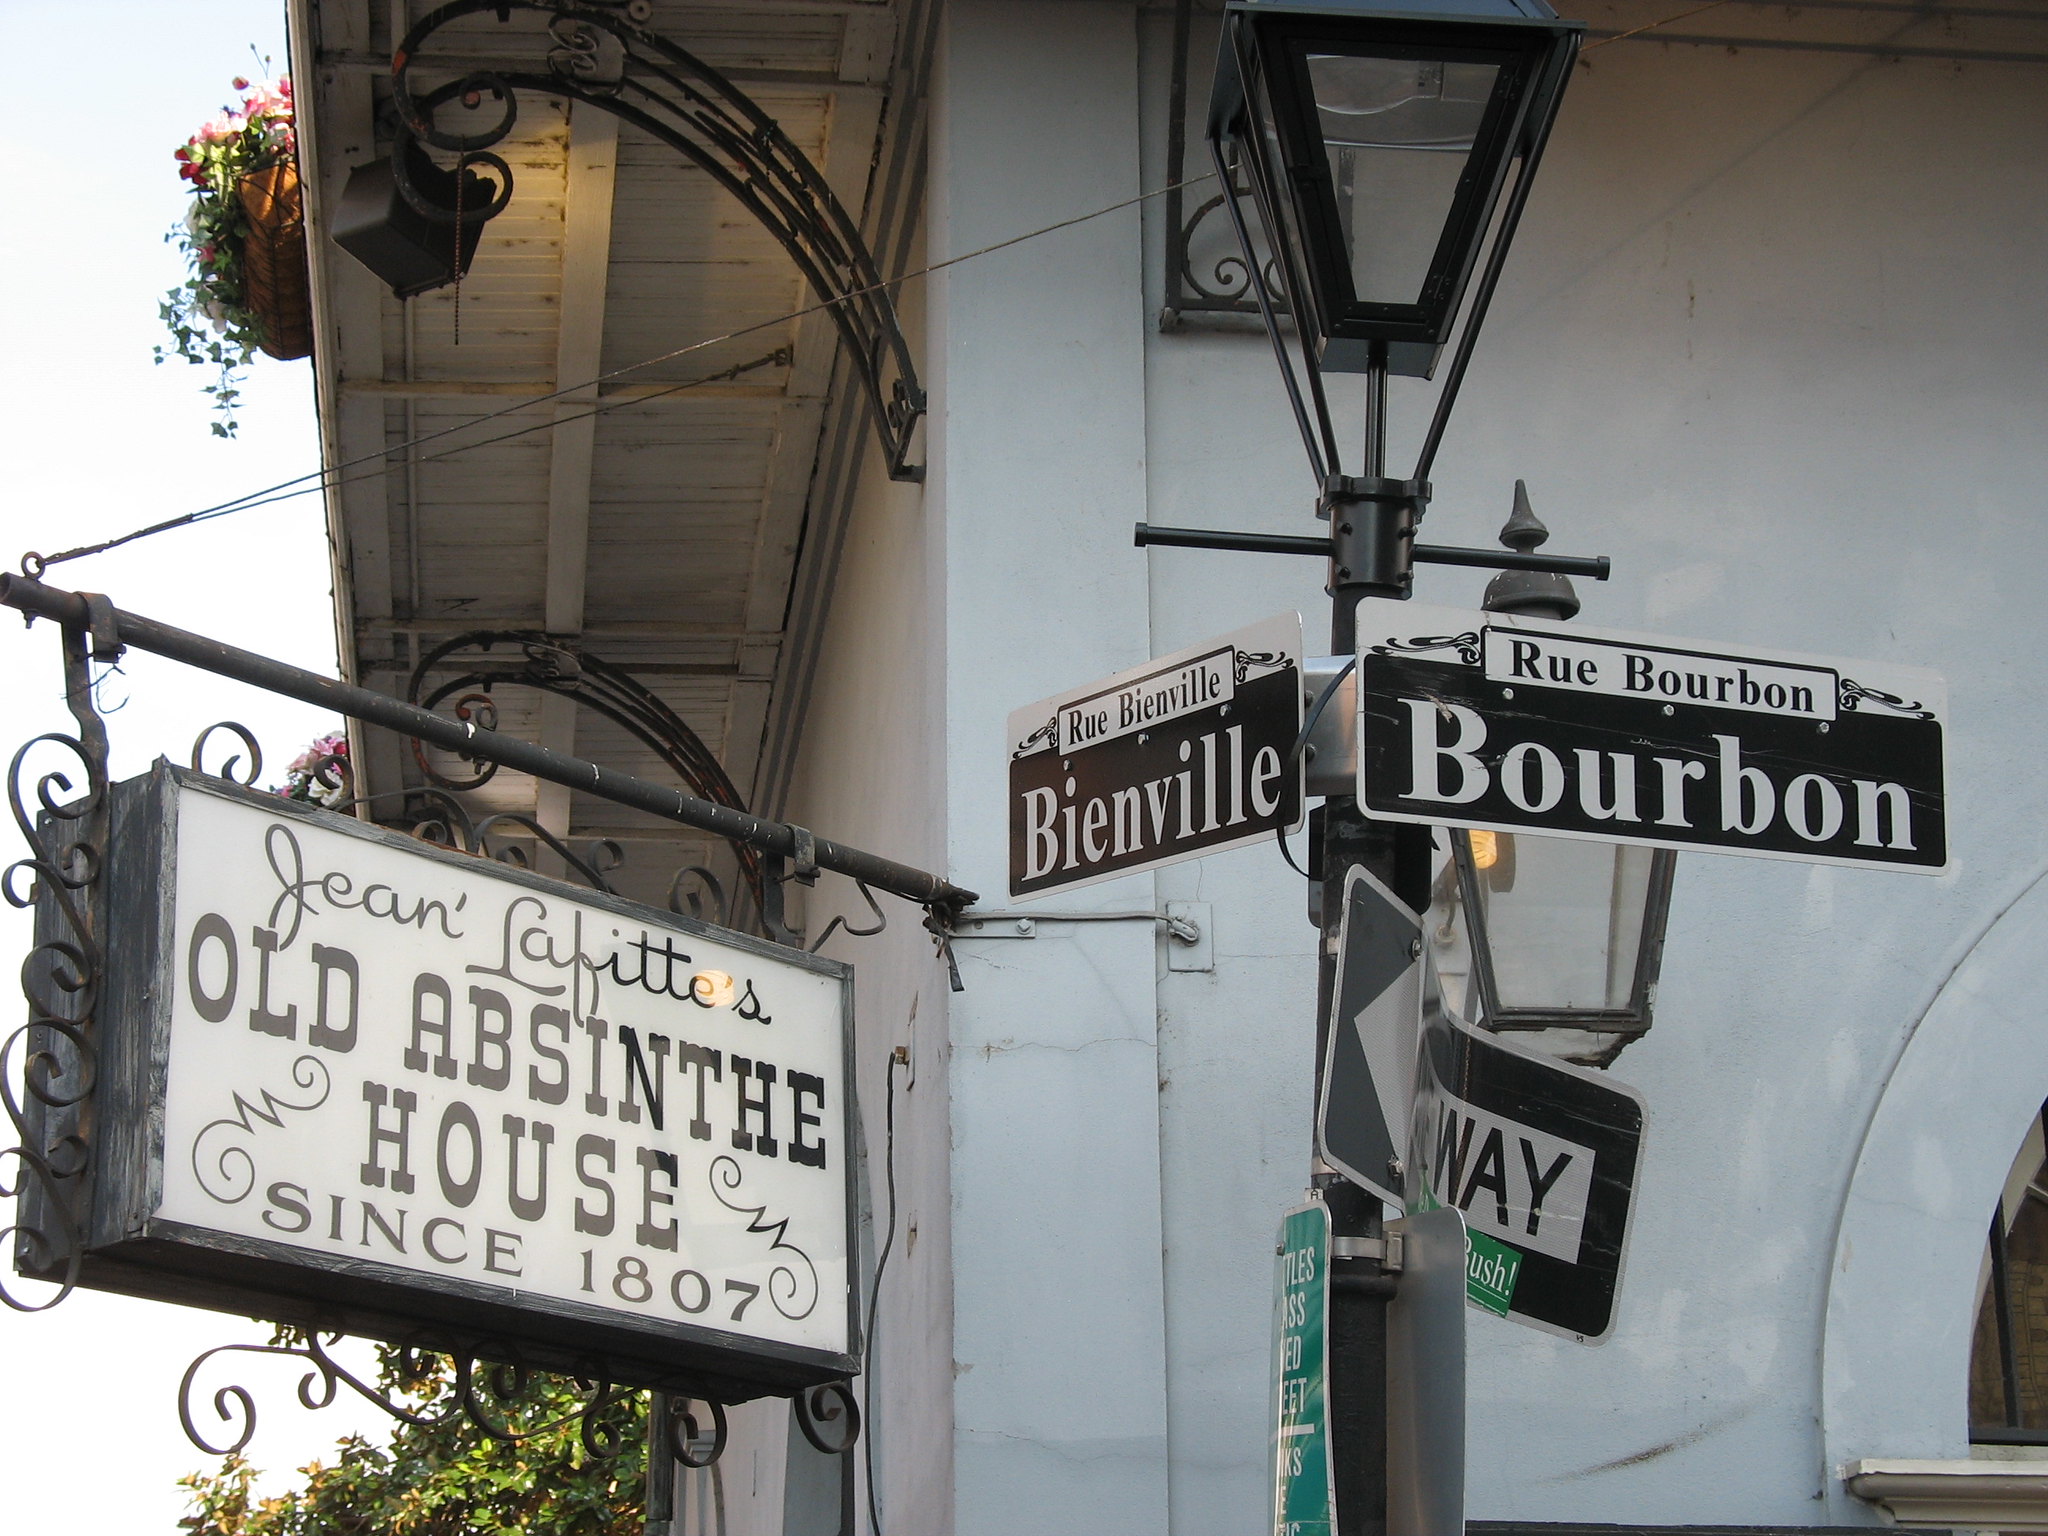 Corner of Bienville and Bourbon, French Quarter, New Orleans